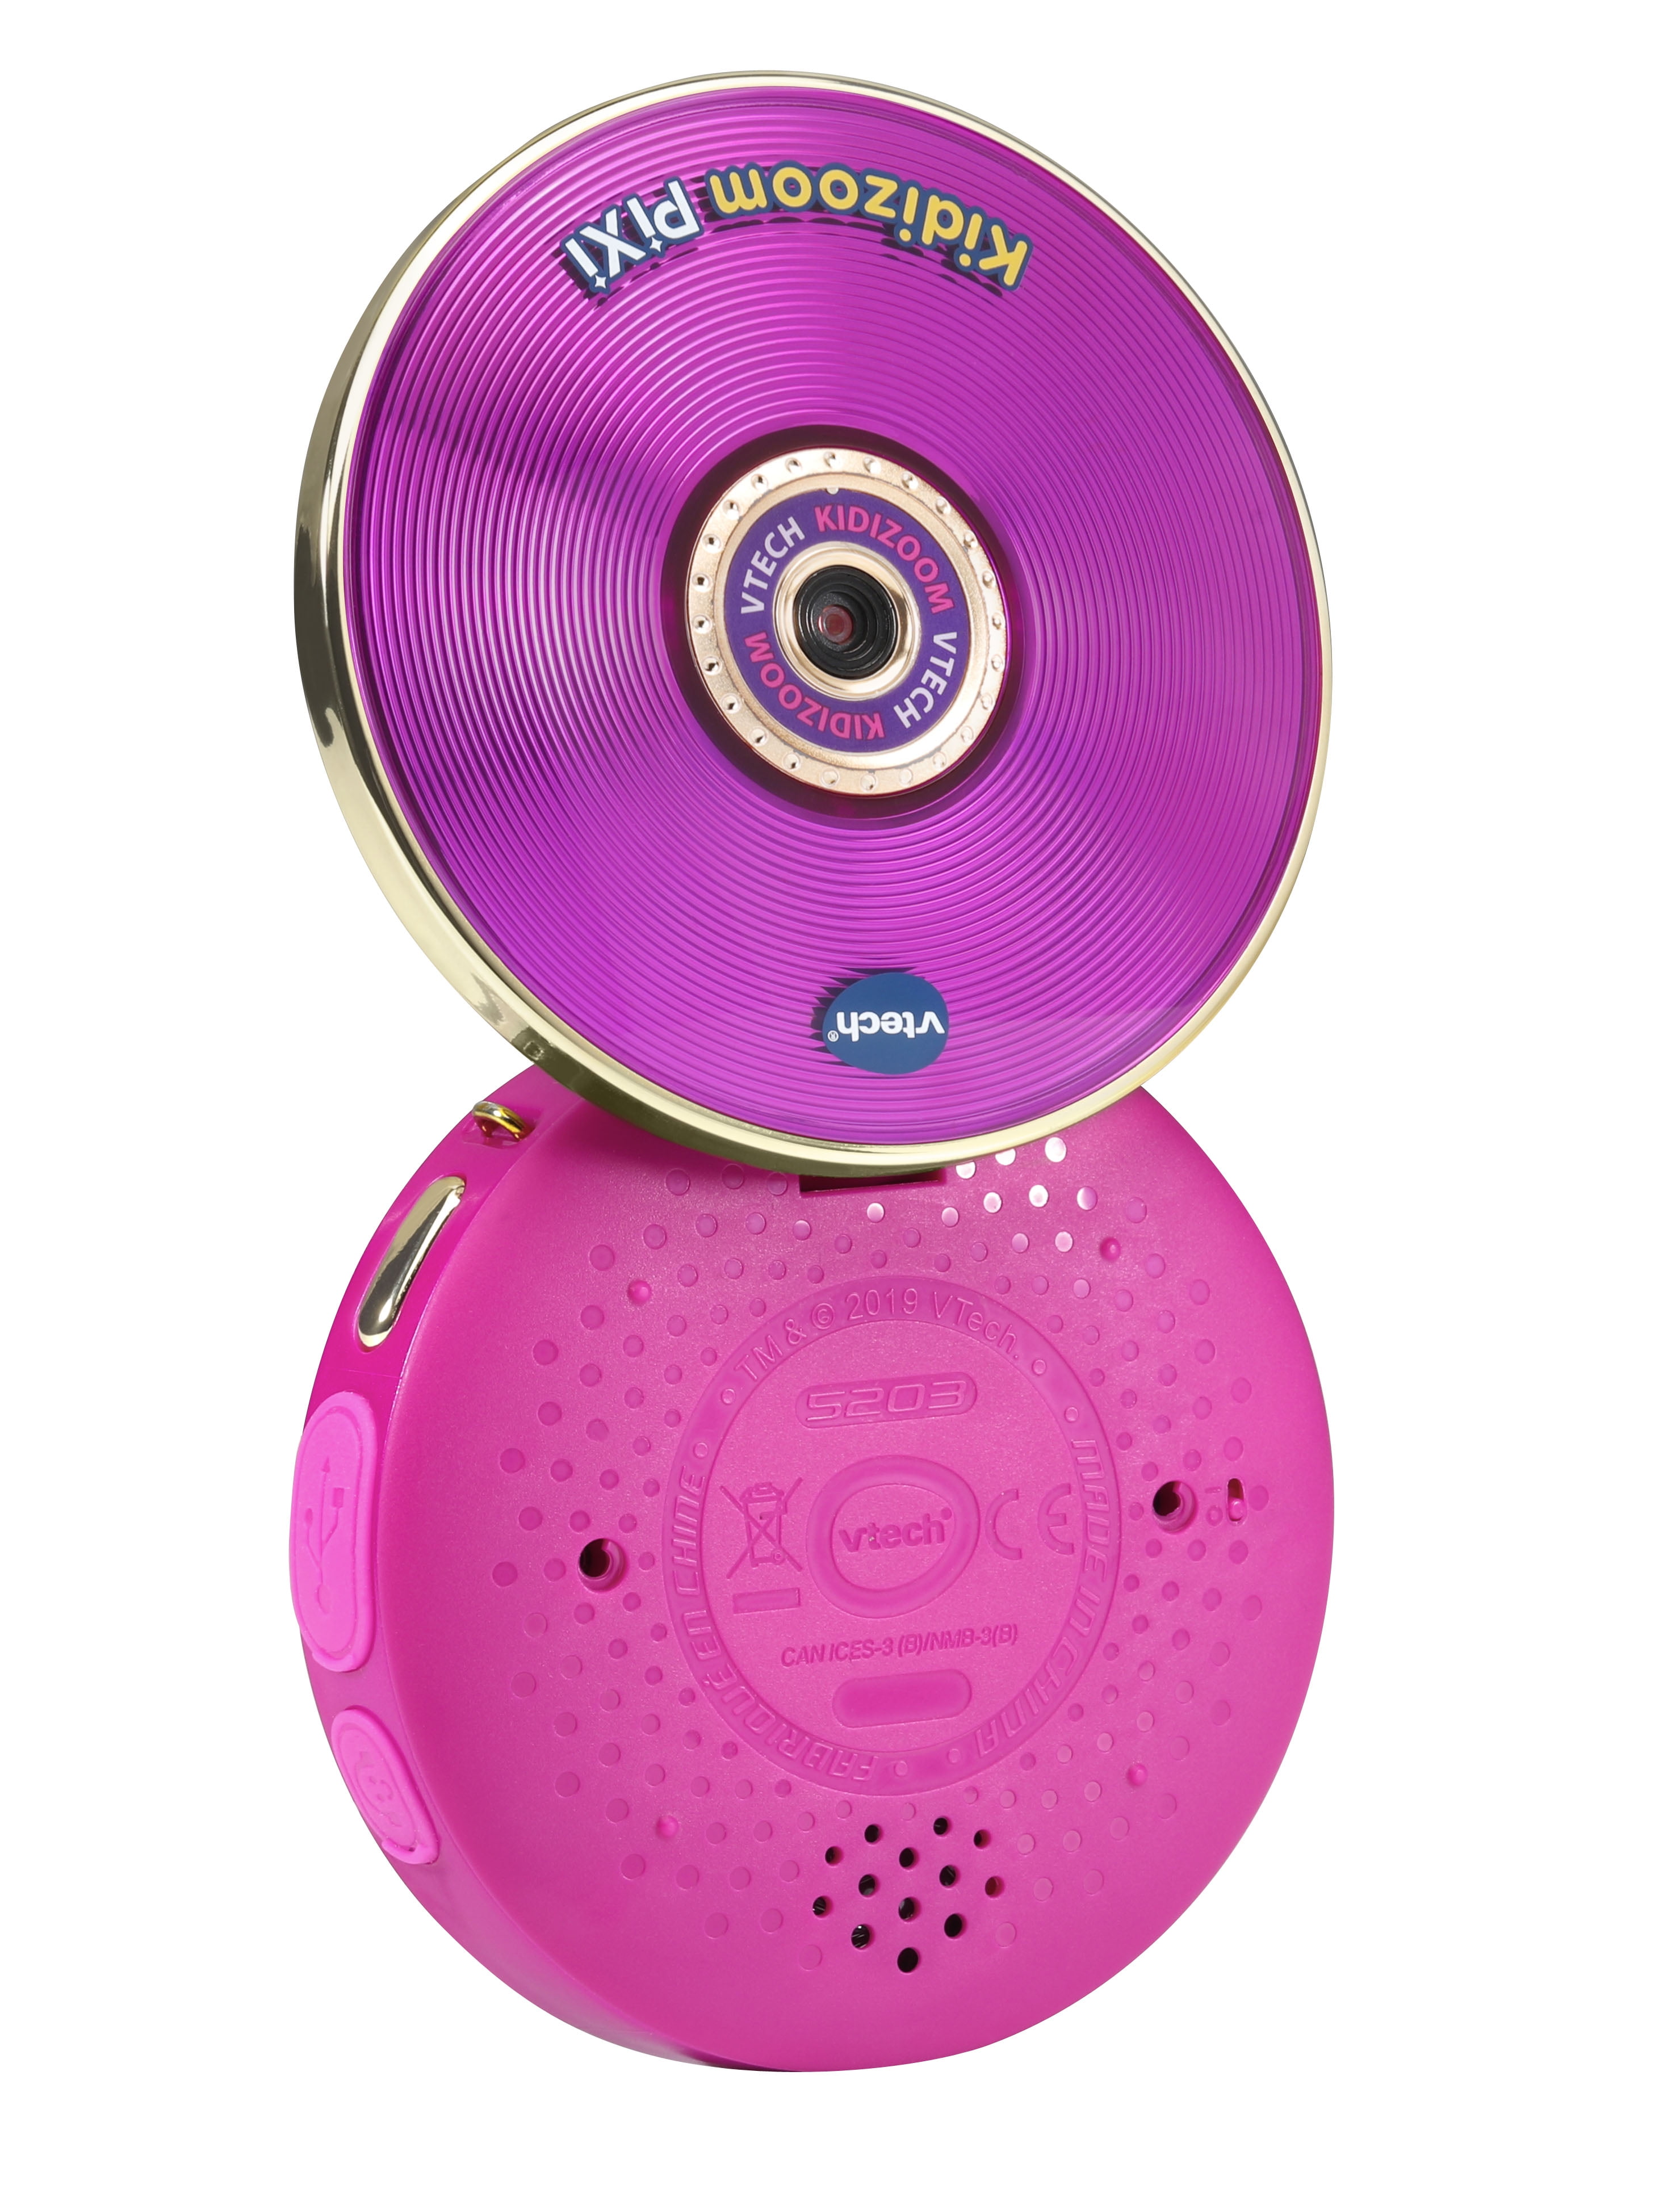 NEW VTech 80-520300 Kidizoom PiXi Compact Camera with Flip Top Lid in Pink 